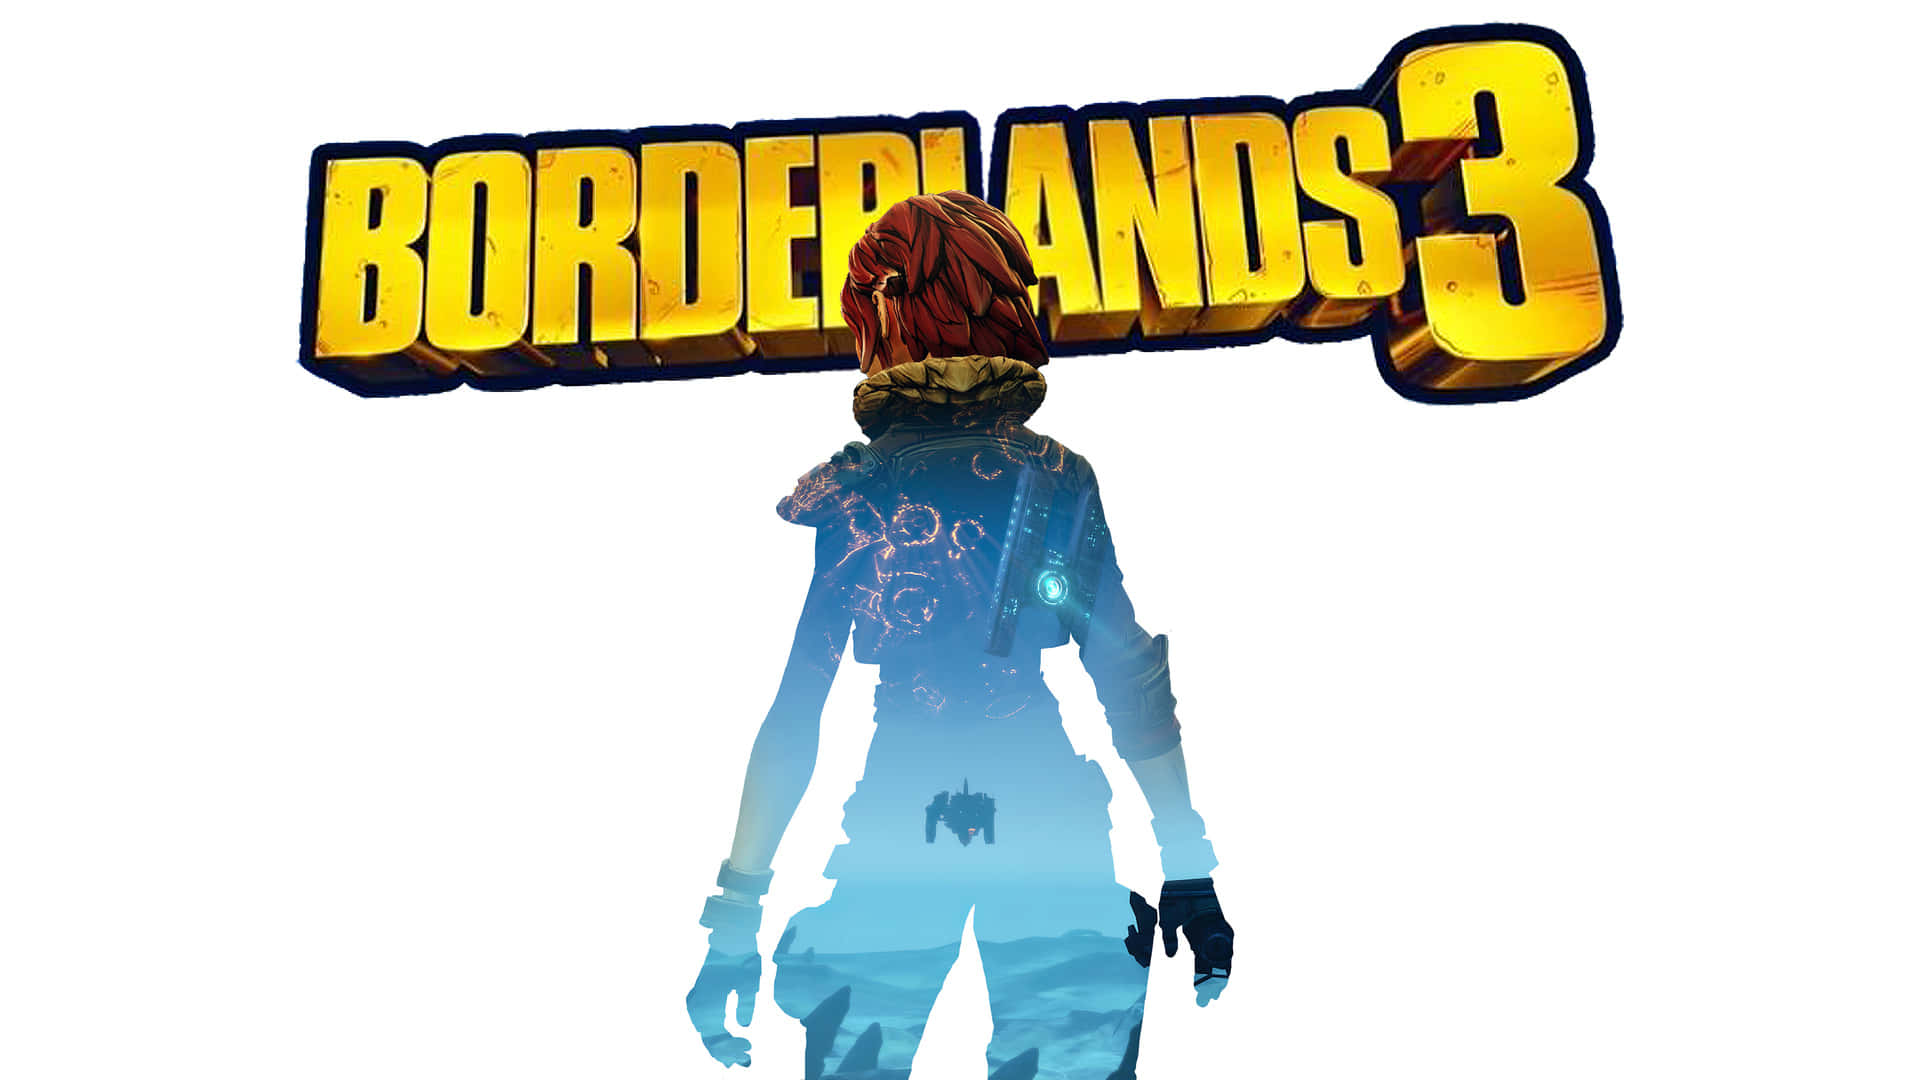 Let the adventure begin with Borderlands 3